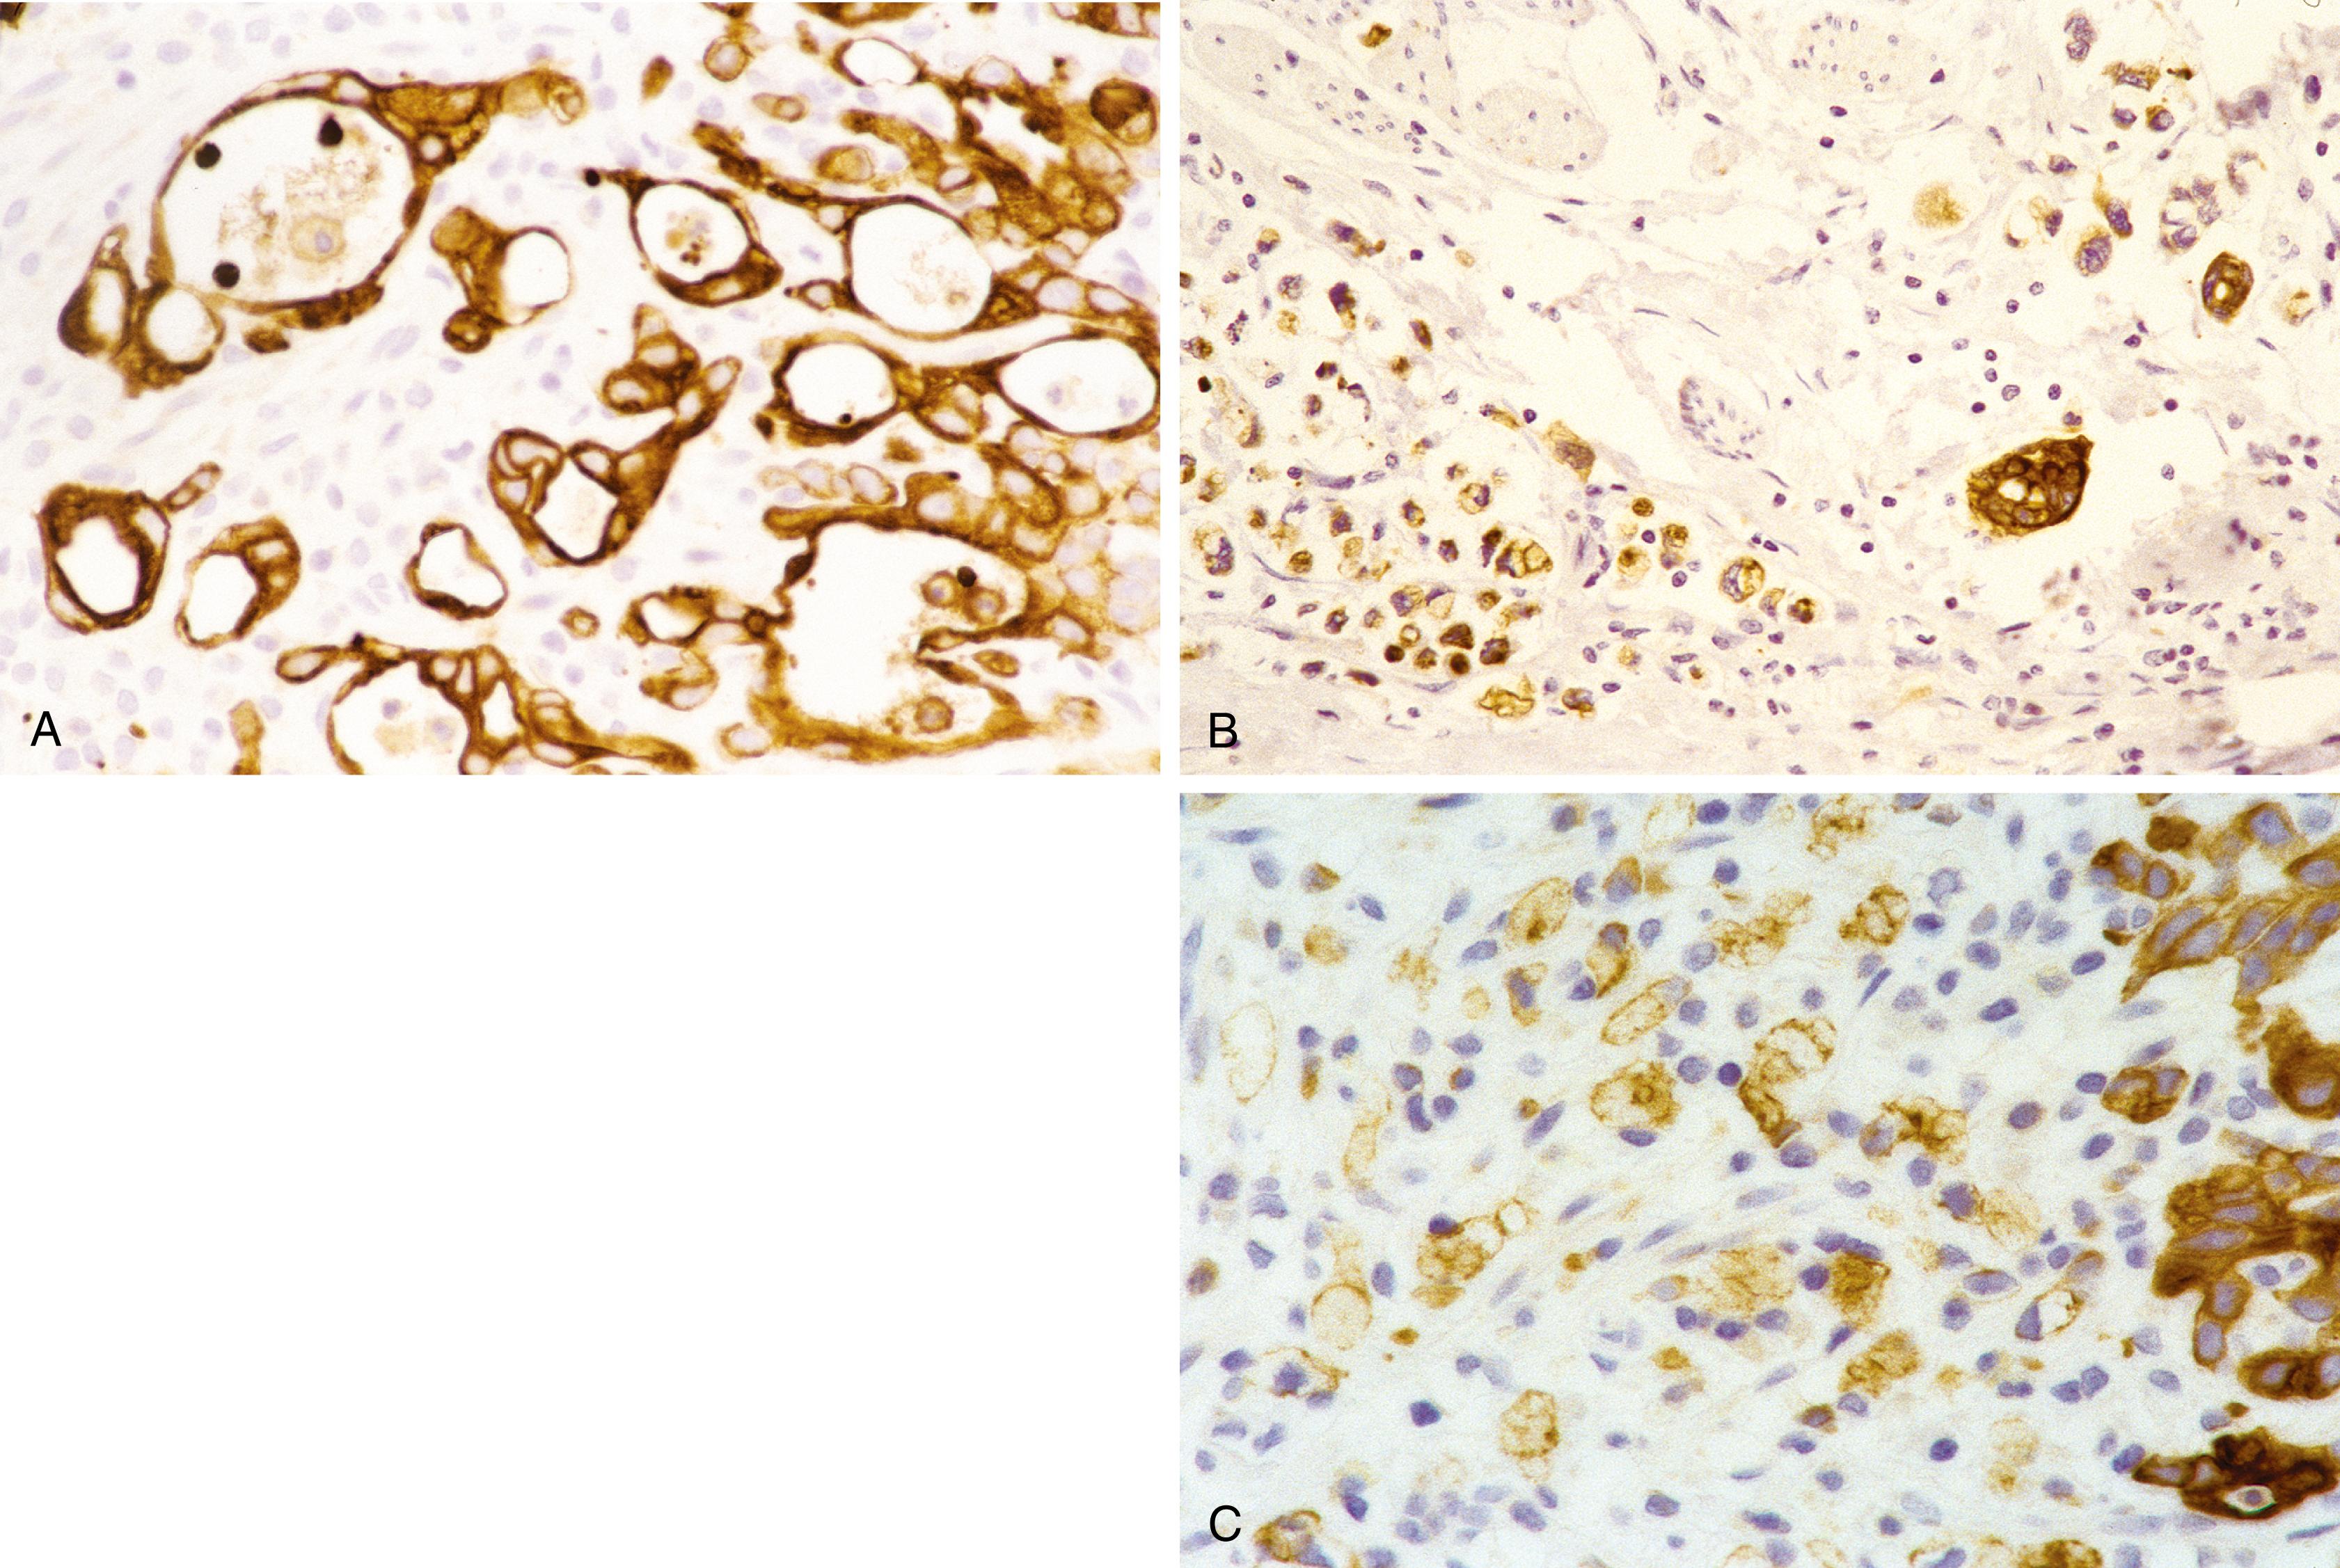 Fig. 14.9, (A) Gastric adenocarcinoma, intestinal (glandular) type. Cytokeratin 7 (CK7) is diffusely and strongly reactive. (B) Almost all of the gastric signet-ring cell adenocarcinoma cells strongly stain with CK7. (C) The glandular region of this gastric adenocarcinoma (right) is strongly CK7 positive, whereas the adjacent signet-ring cells are negative to weakly reactive. Patchy or variegated CK7 staining is characteristic of gastric adenocarcinoma.